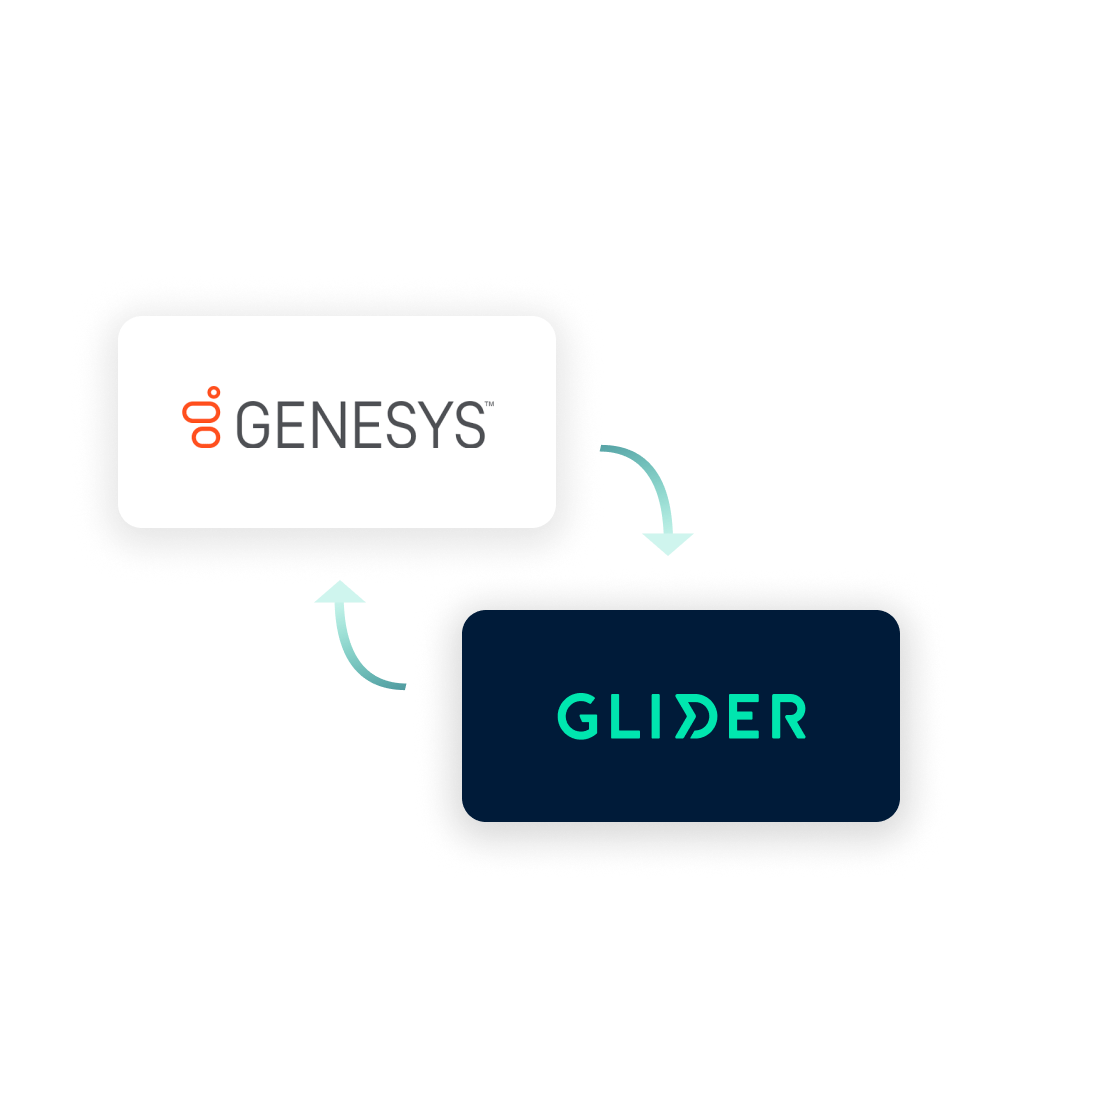 Genesys and Glider logo with arrows connecting